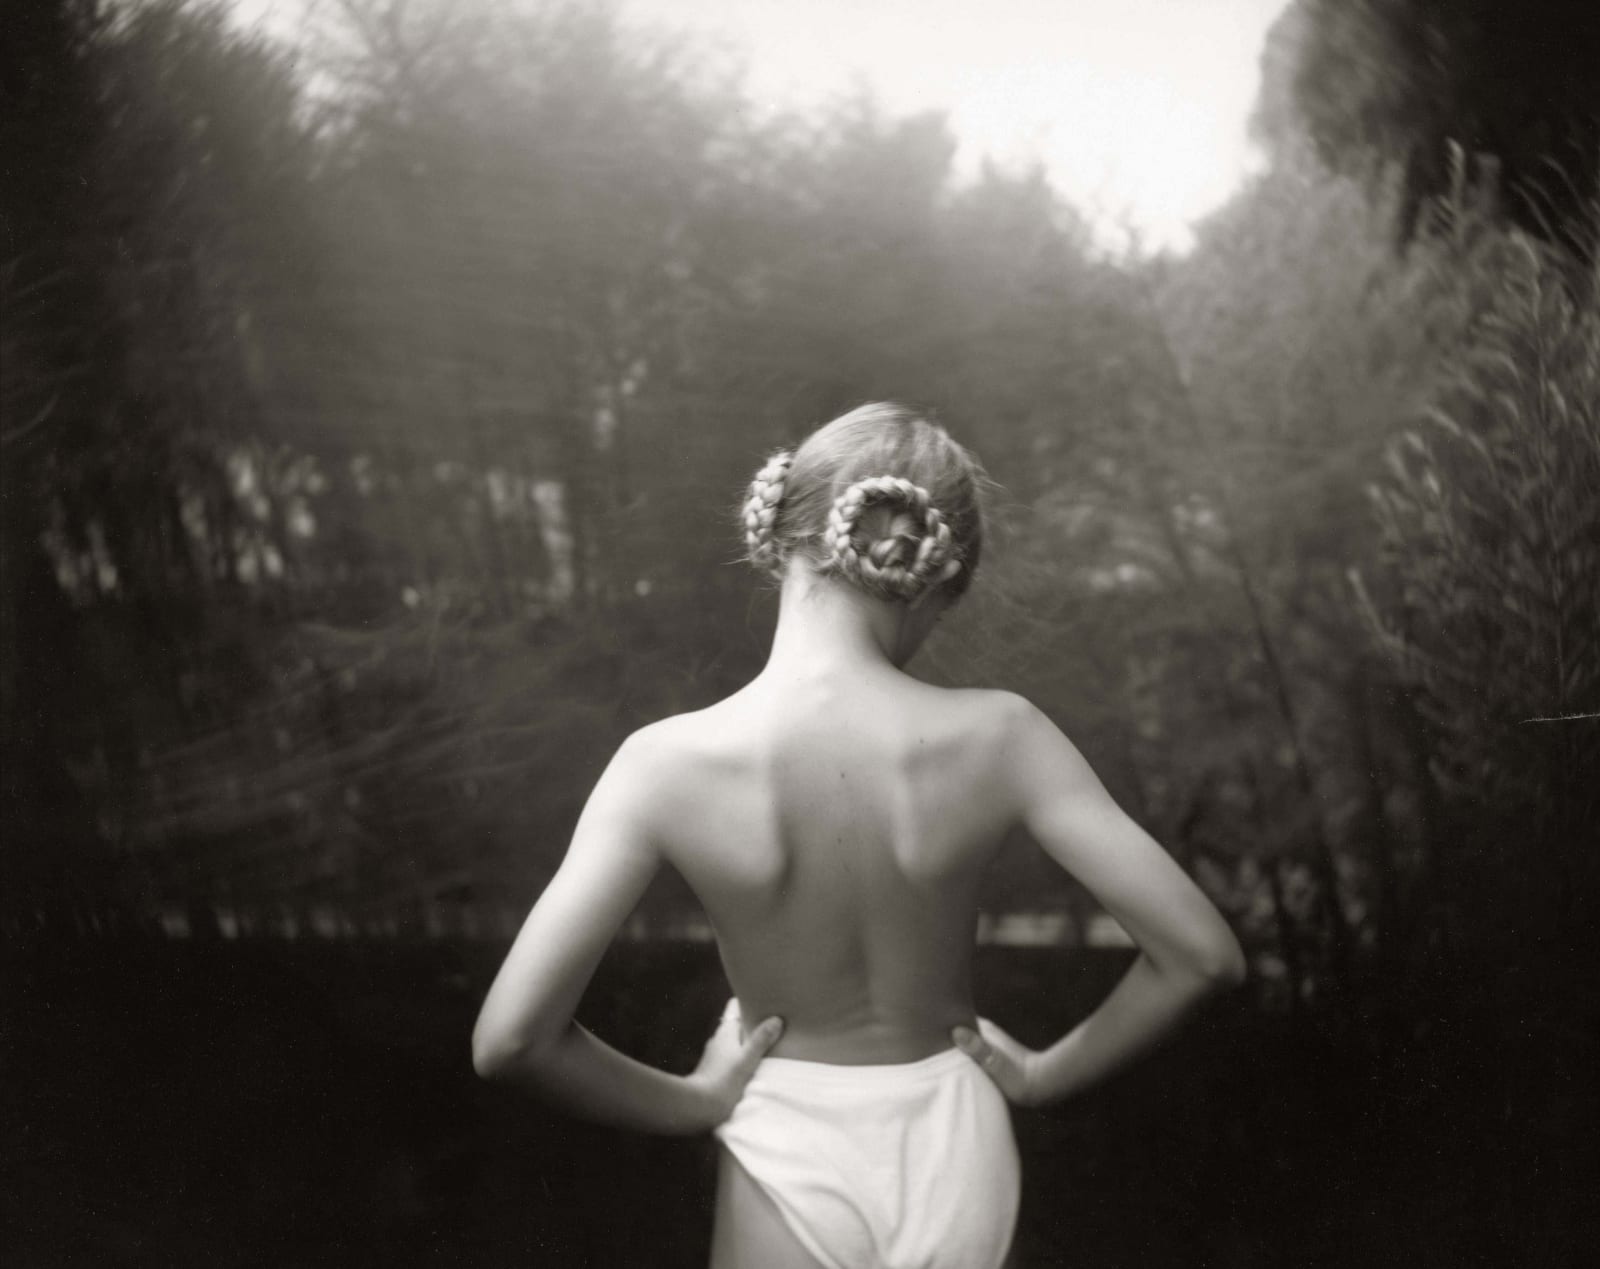 Jessie with braids in her hair, from the Immediate Family series, by Sally Mann